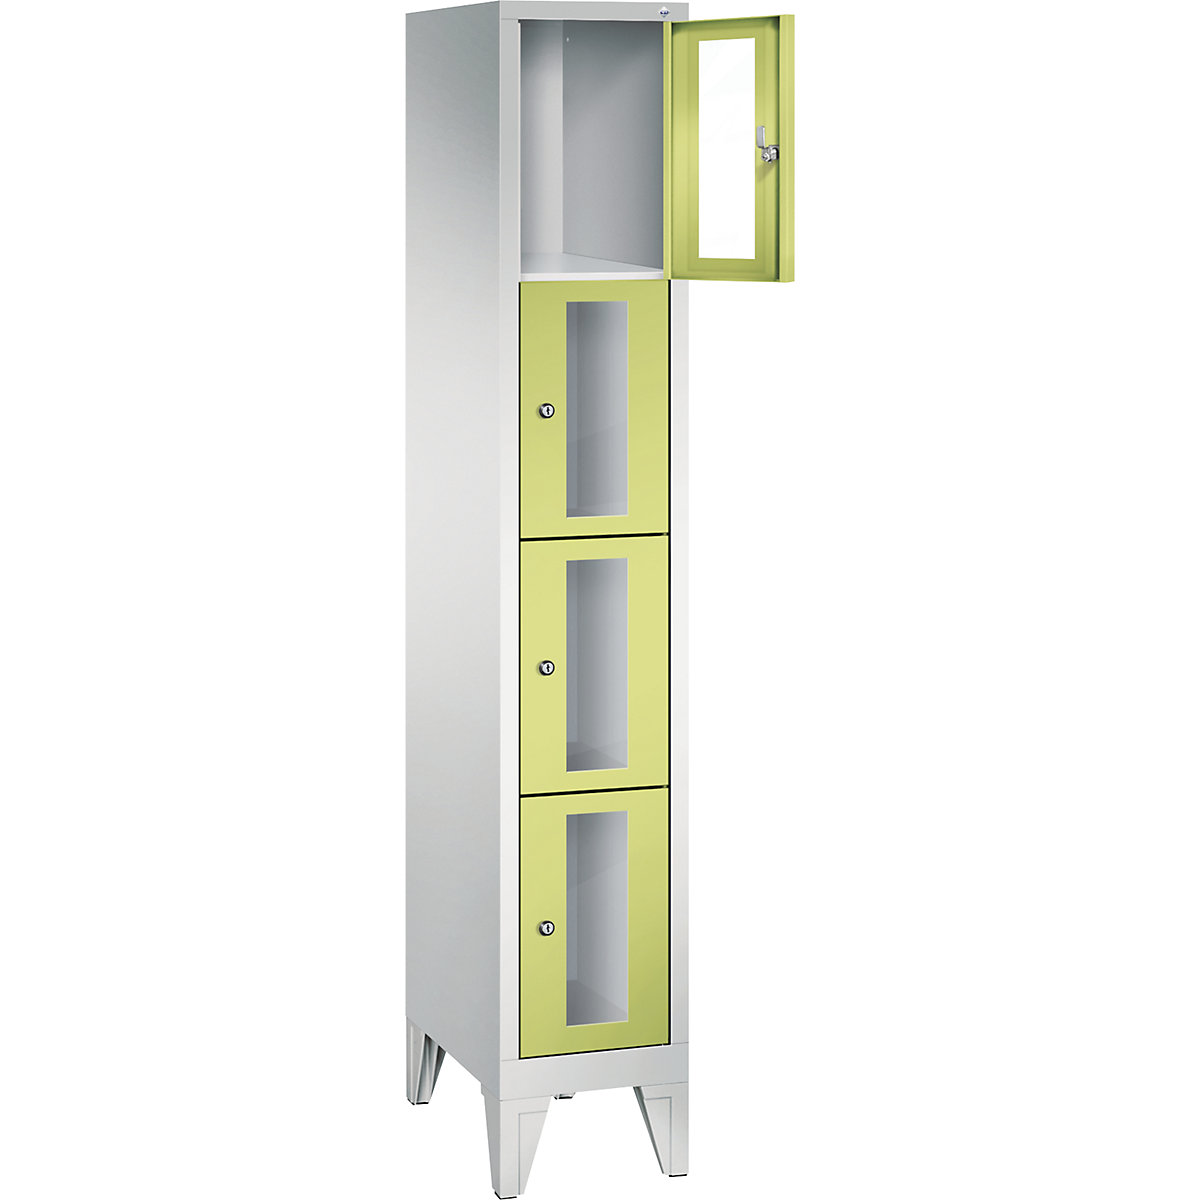 C+P – CLASSIC locker unit, compartment height 375 mm, with feet, 4 compartments, width 320 mm, viridian green door